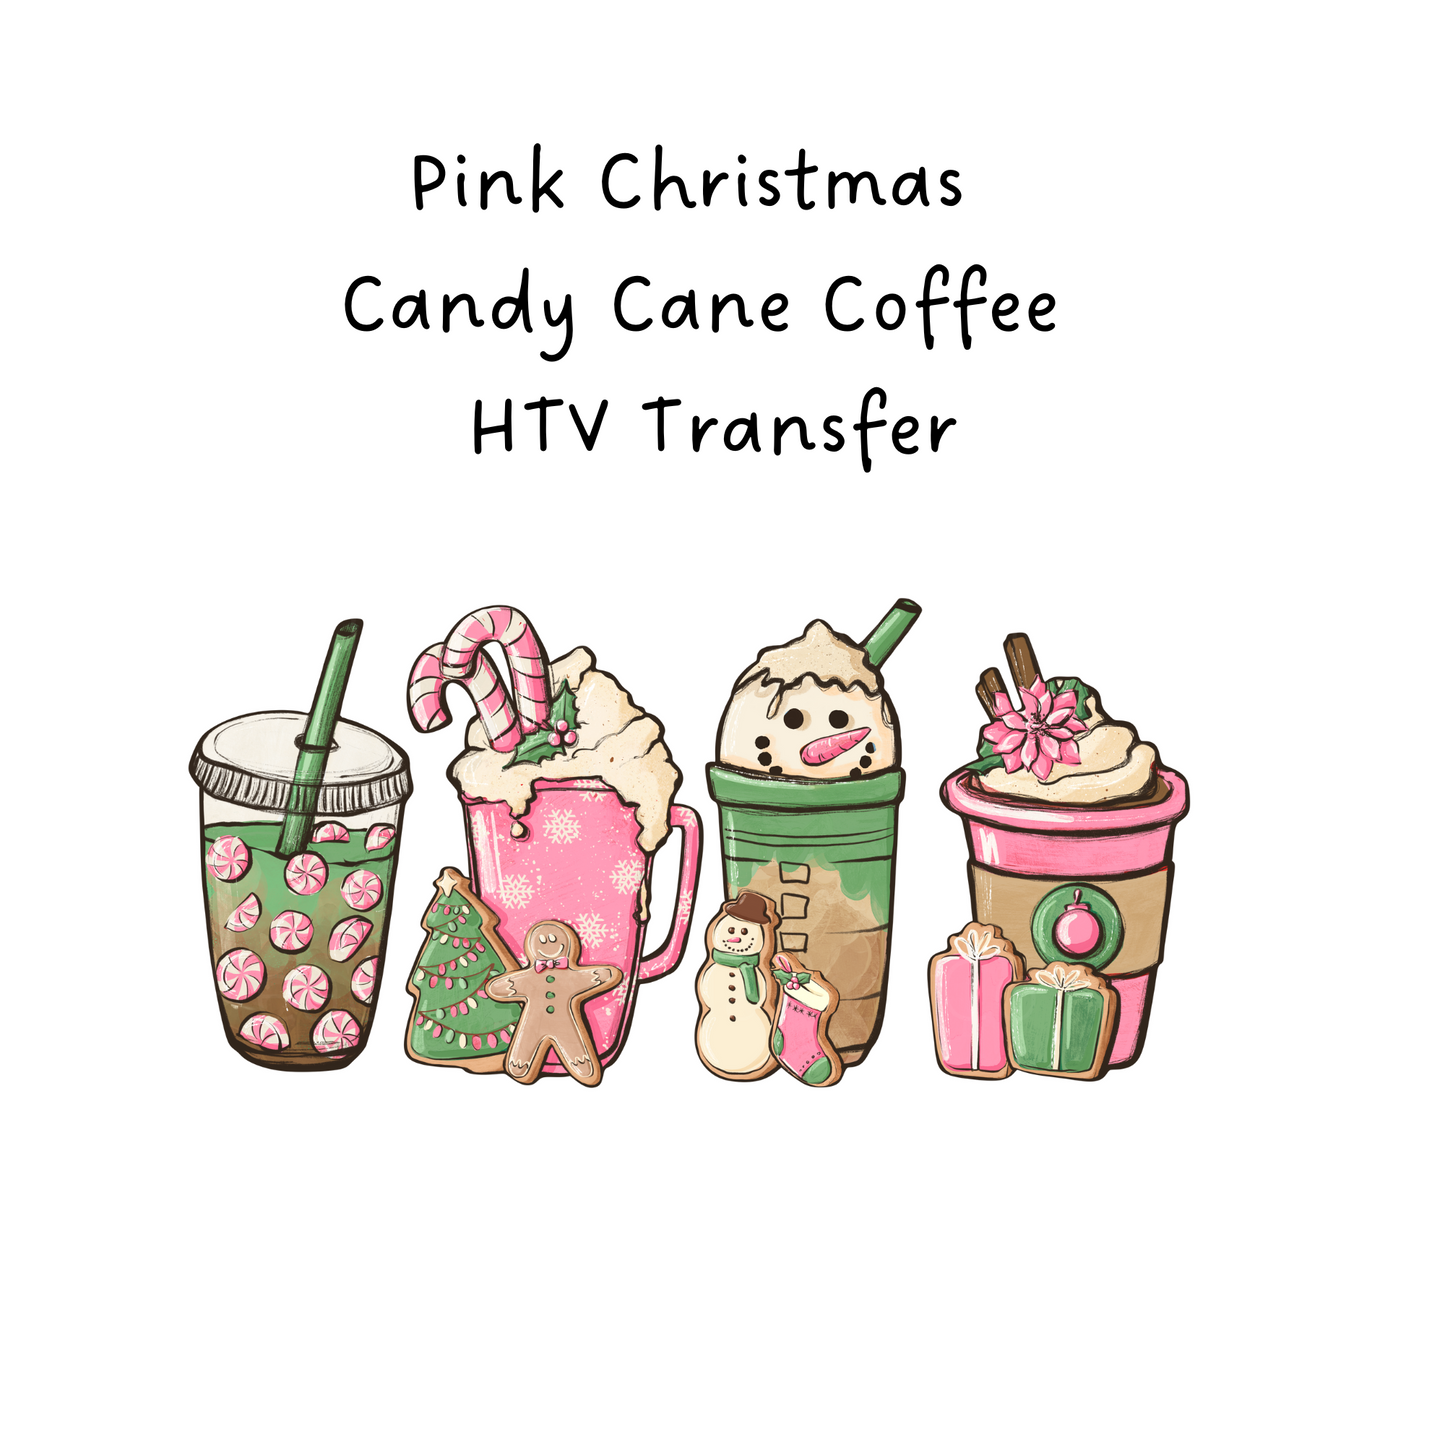 Pink Christmas Candy Cane Coffee HTV Transfer